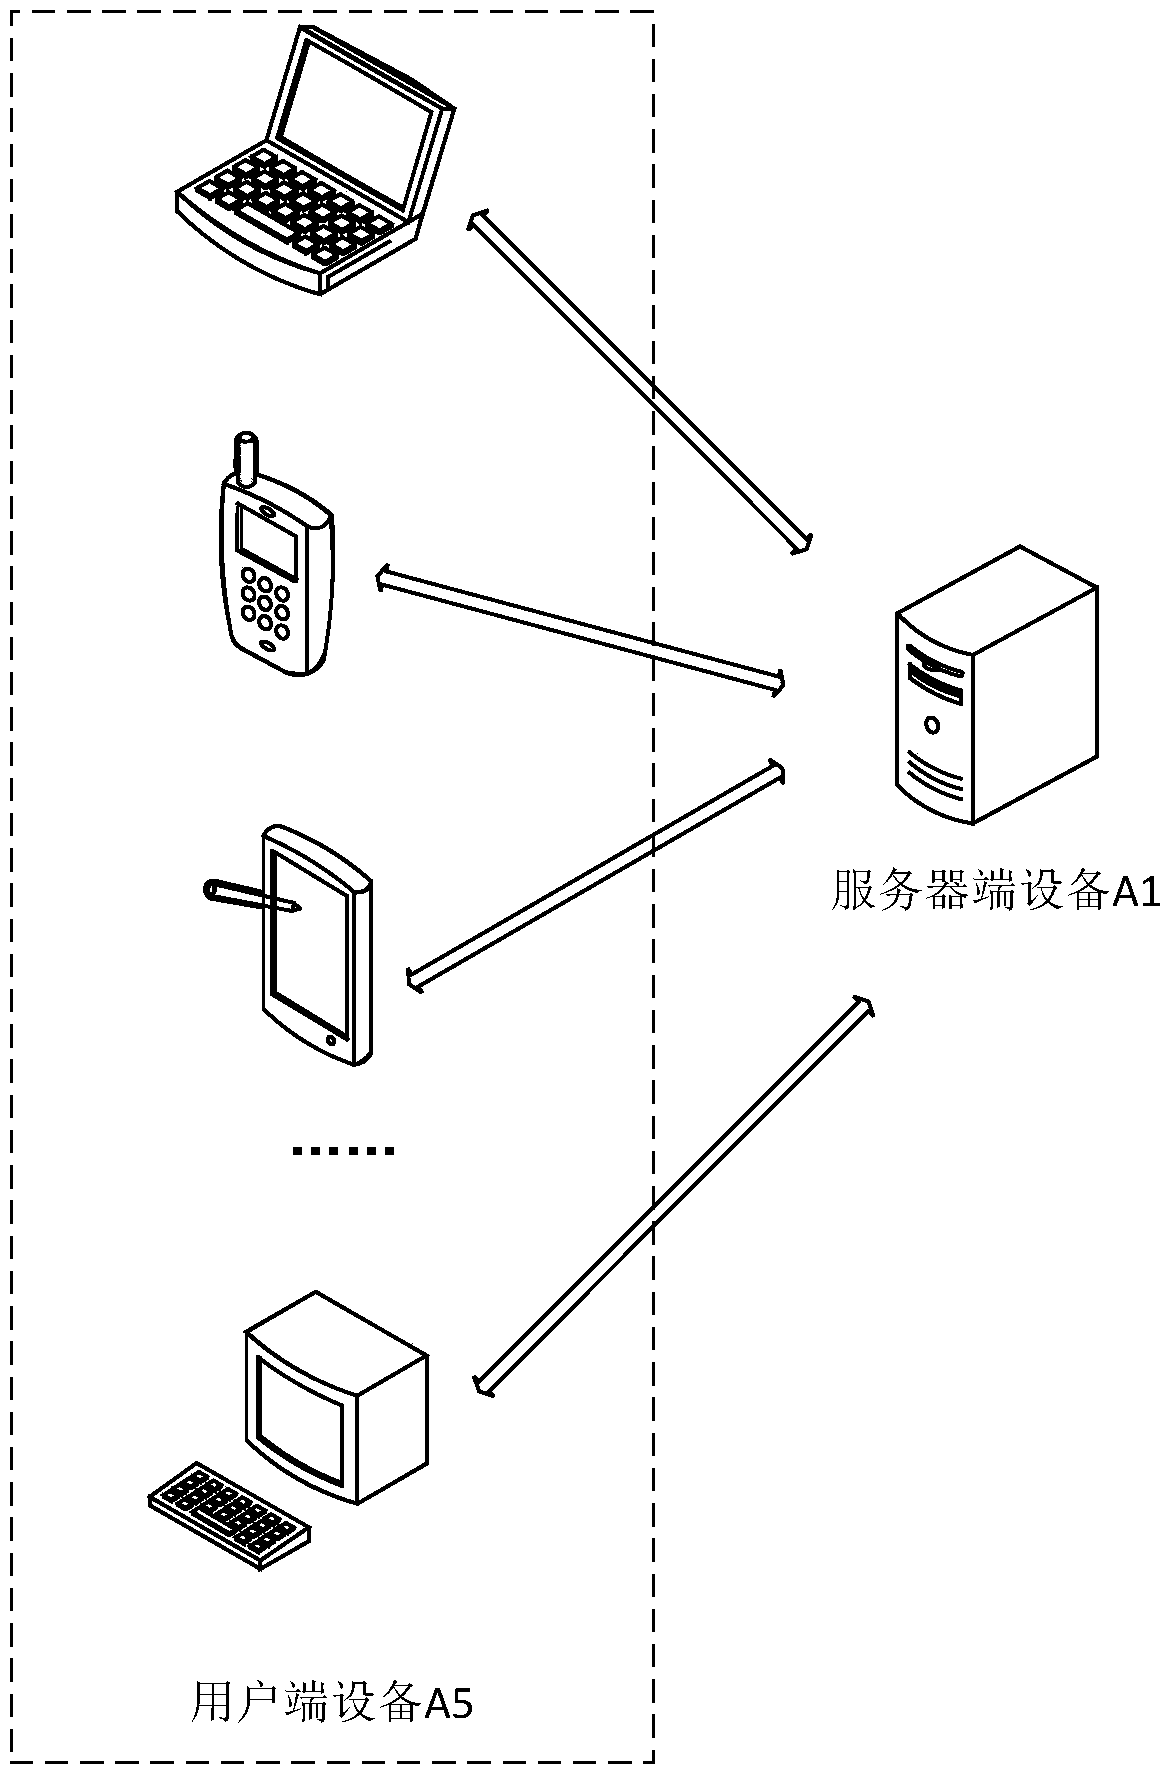 Crude oil flowability detection method and device